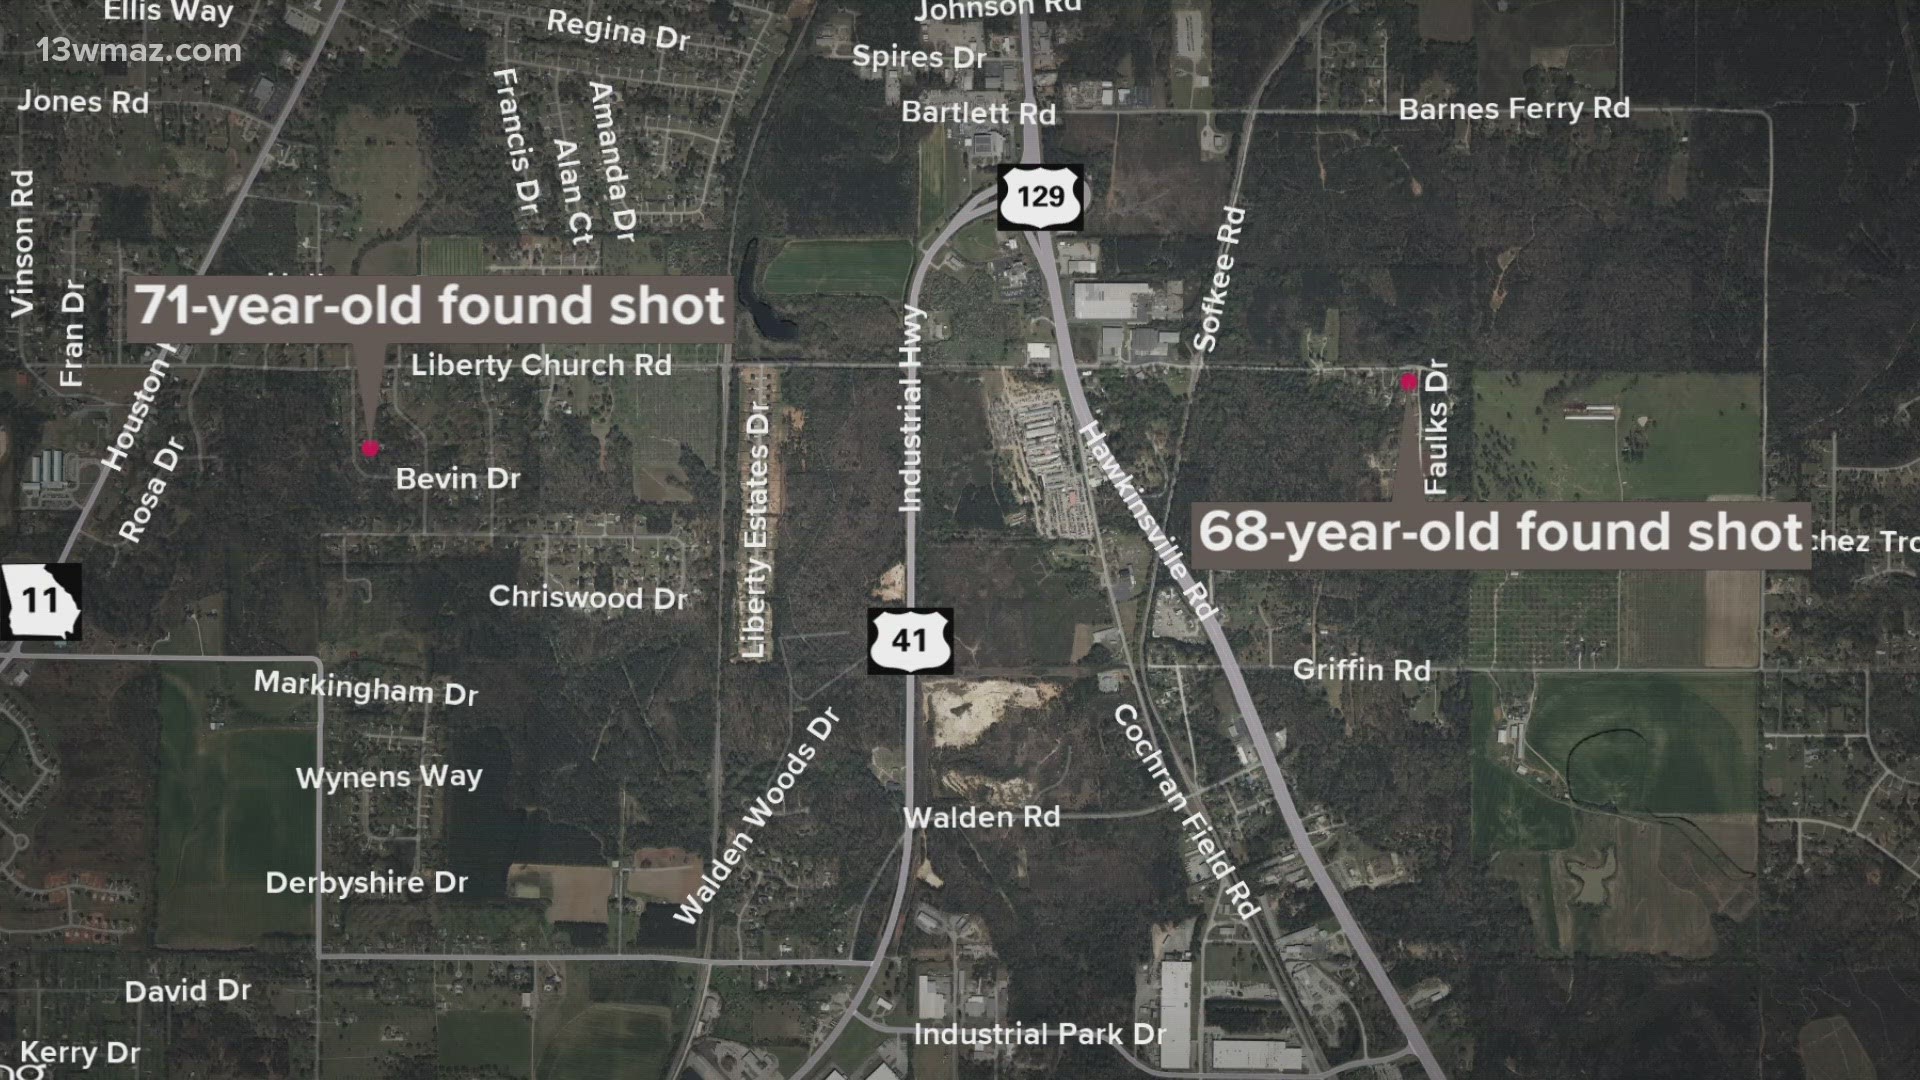 In both shootings, two elderly people were shot only two miles away from one another. The sheriff's office is investigating.